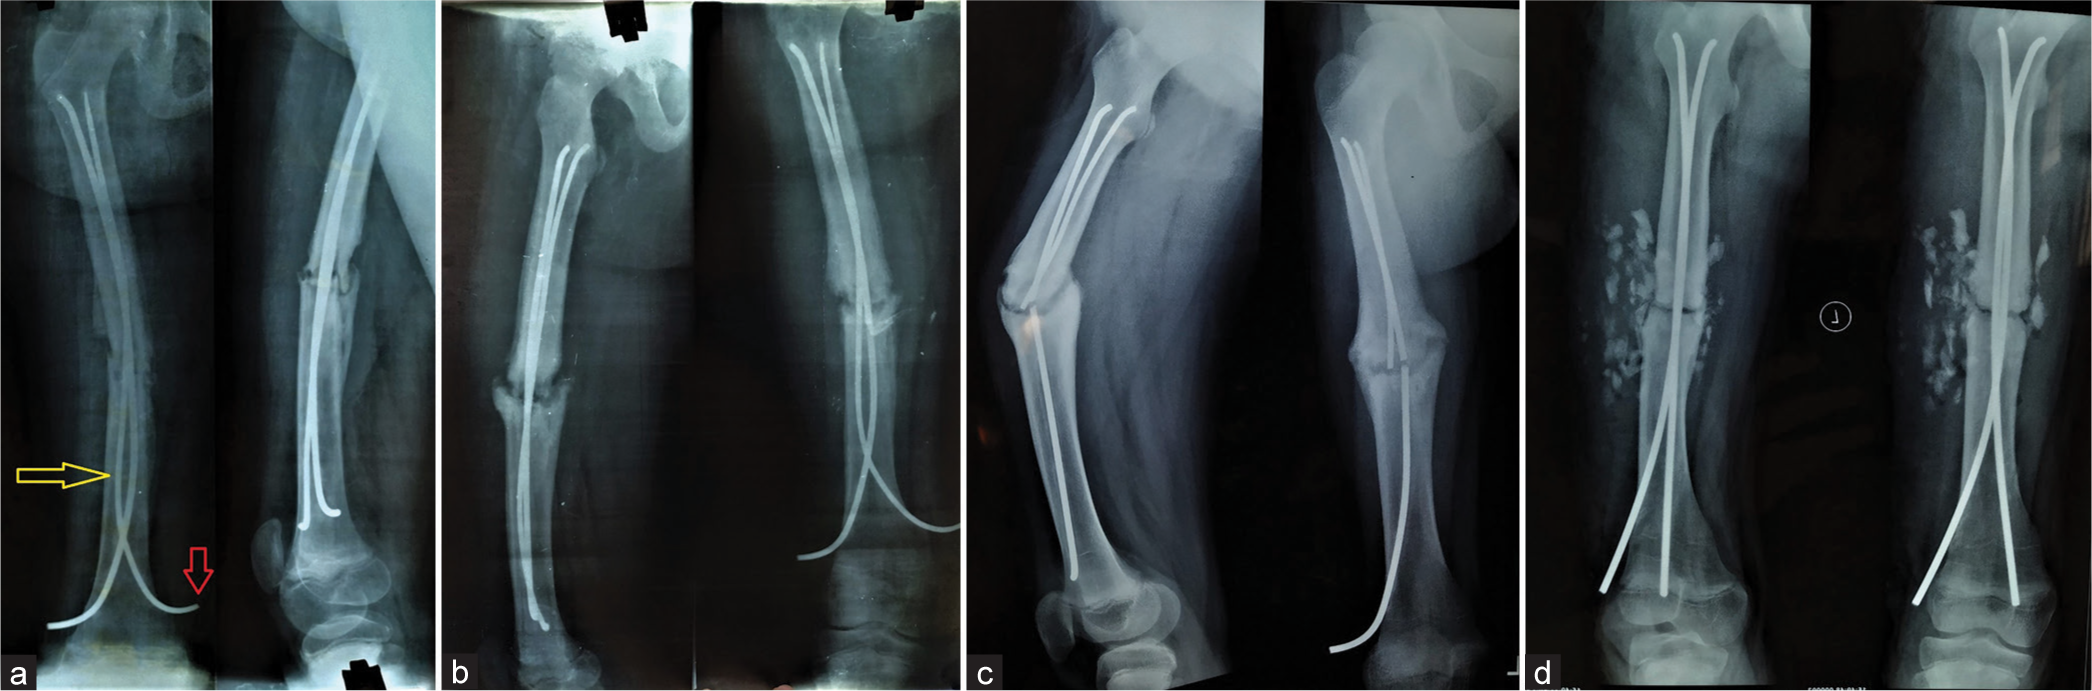 Instability, non-union, and subsequent failure of flexible nails: Takeaways from the complication